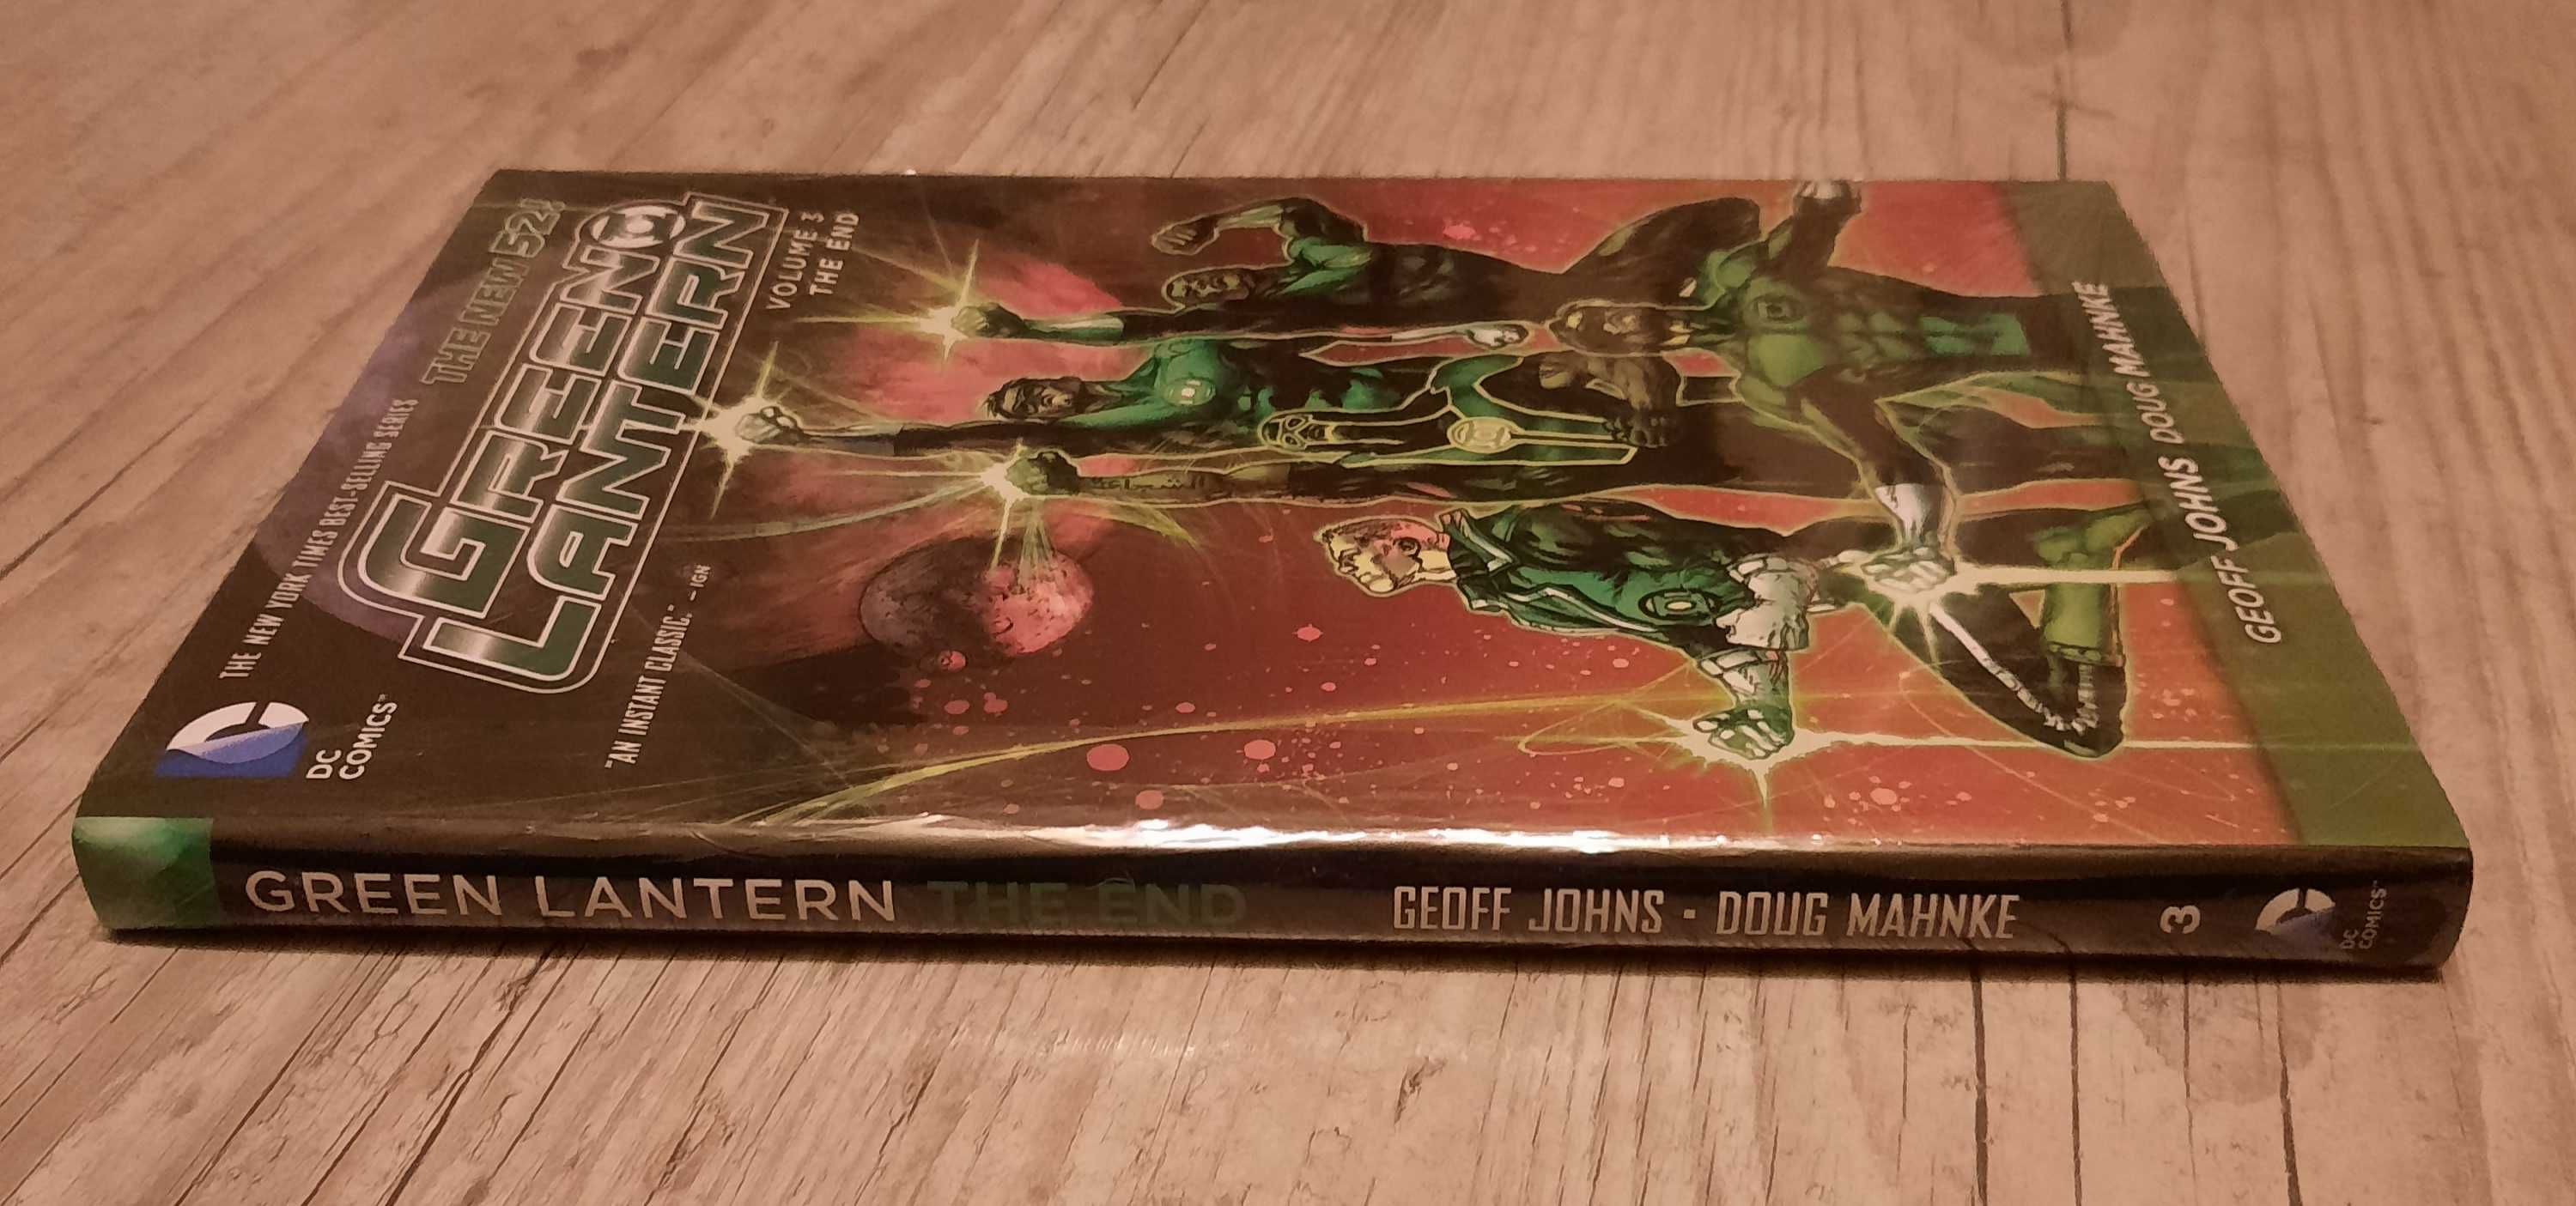 Green Lantern The New 52! Tom 3 The End